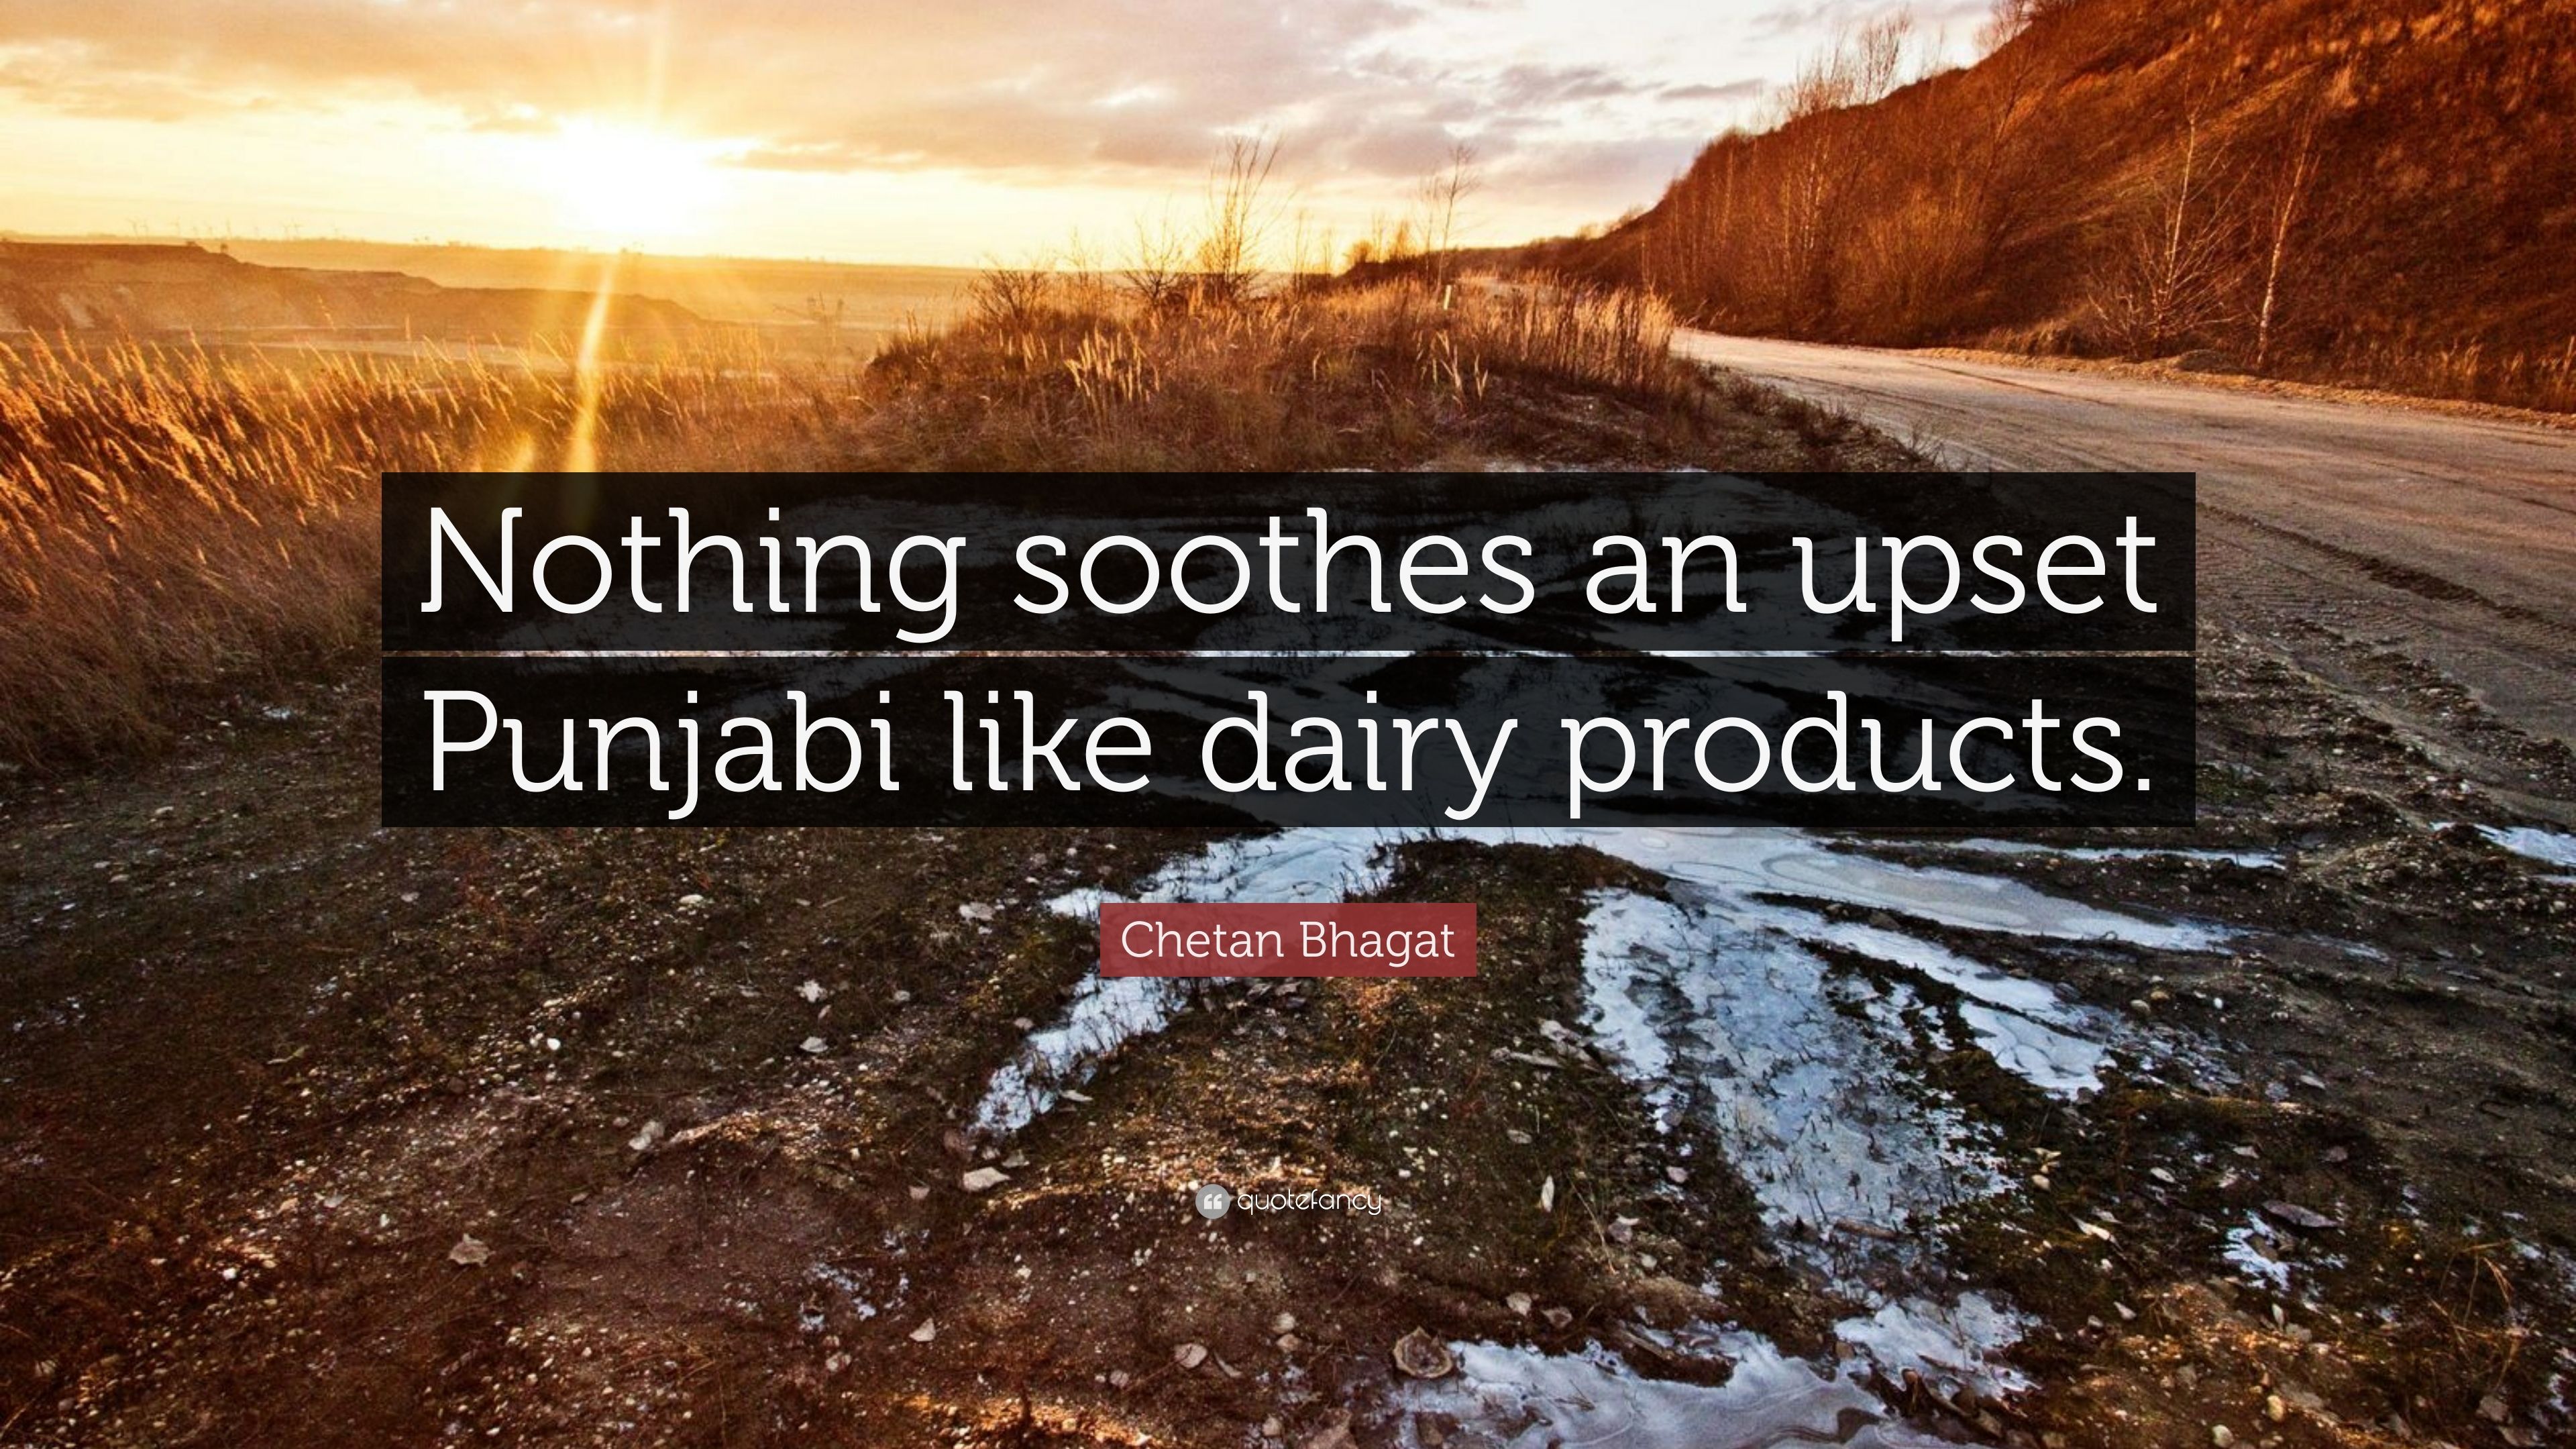 Chetan Bhagat Quote: “Nothing soothes an upset Punjabi like dairy